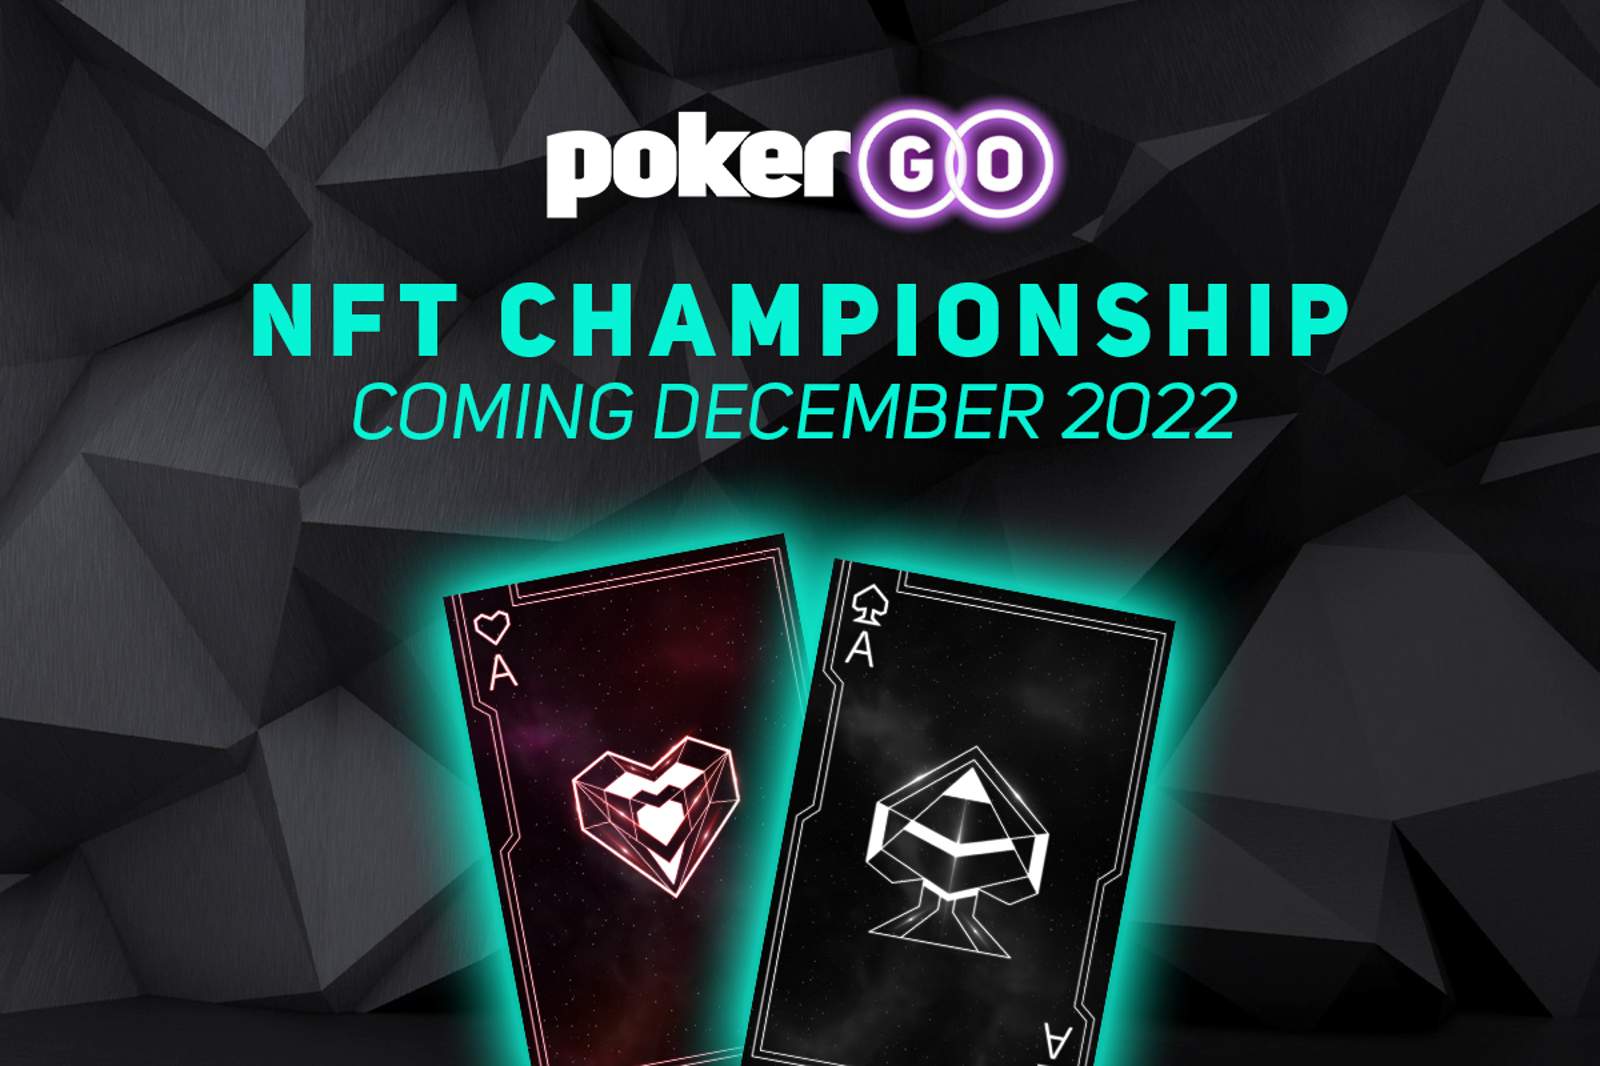 PokerGO® Announces Exclusive PokerGO NFT Championship with $25,000 Added